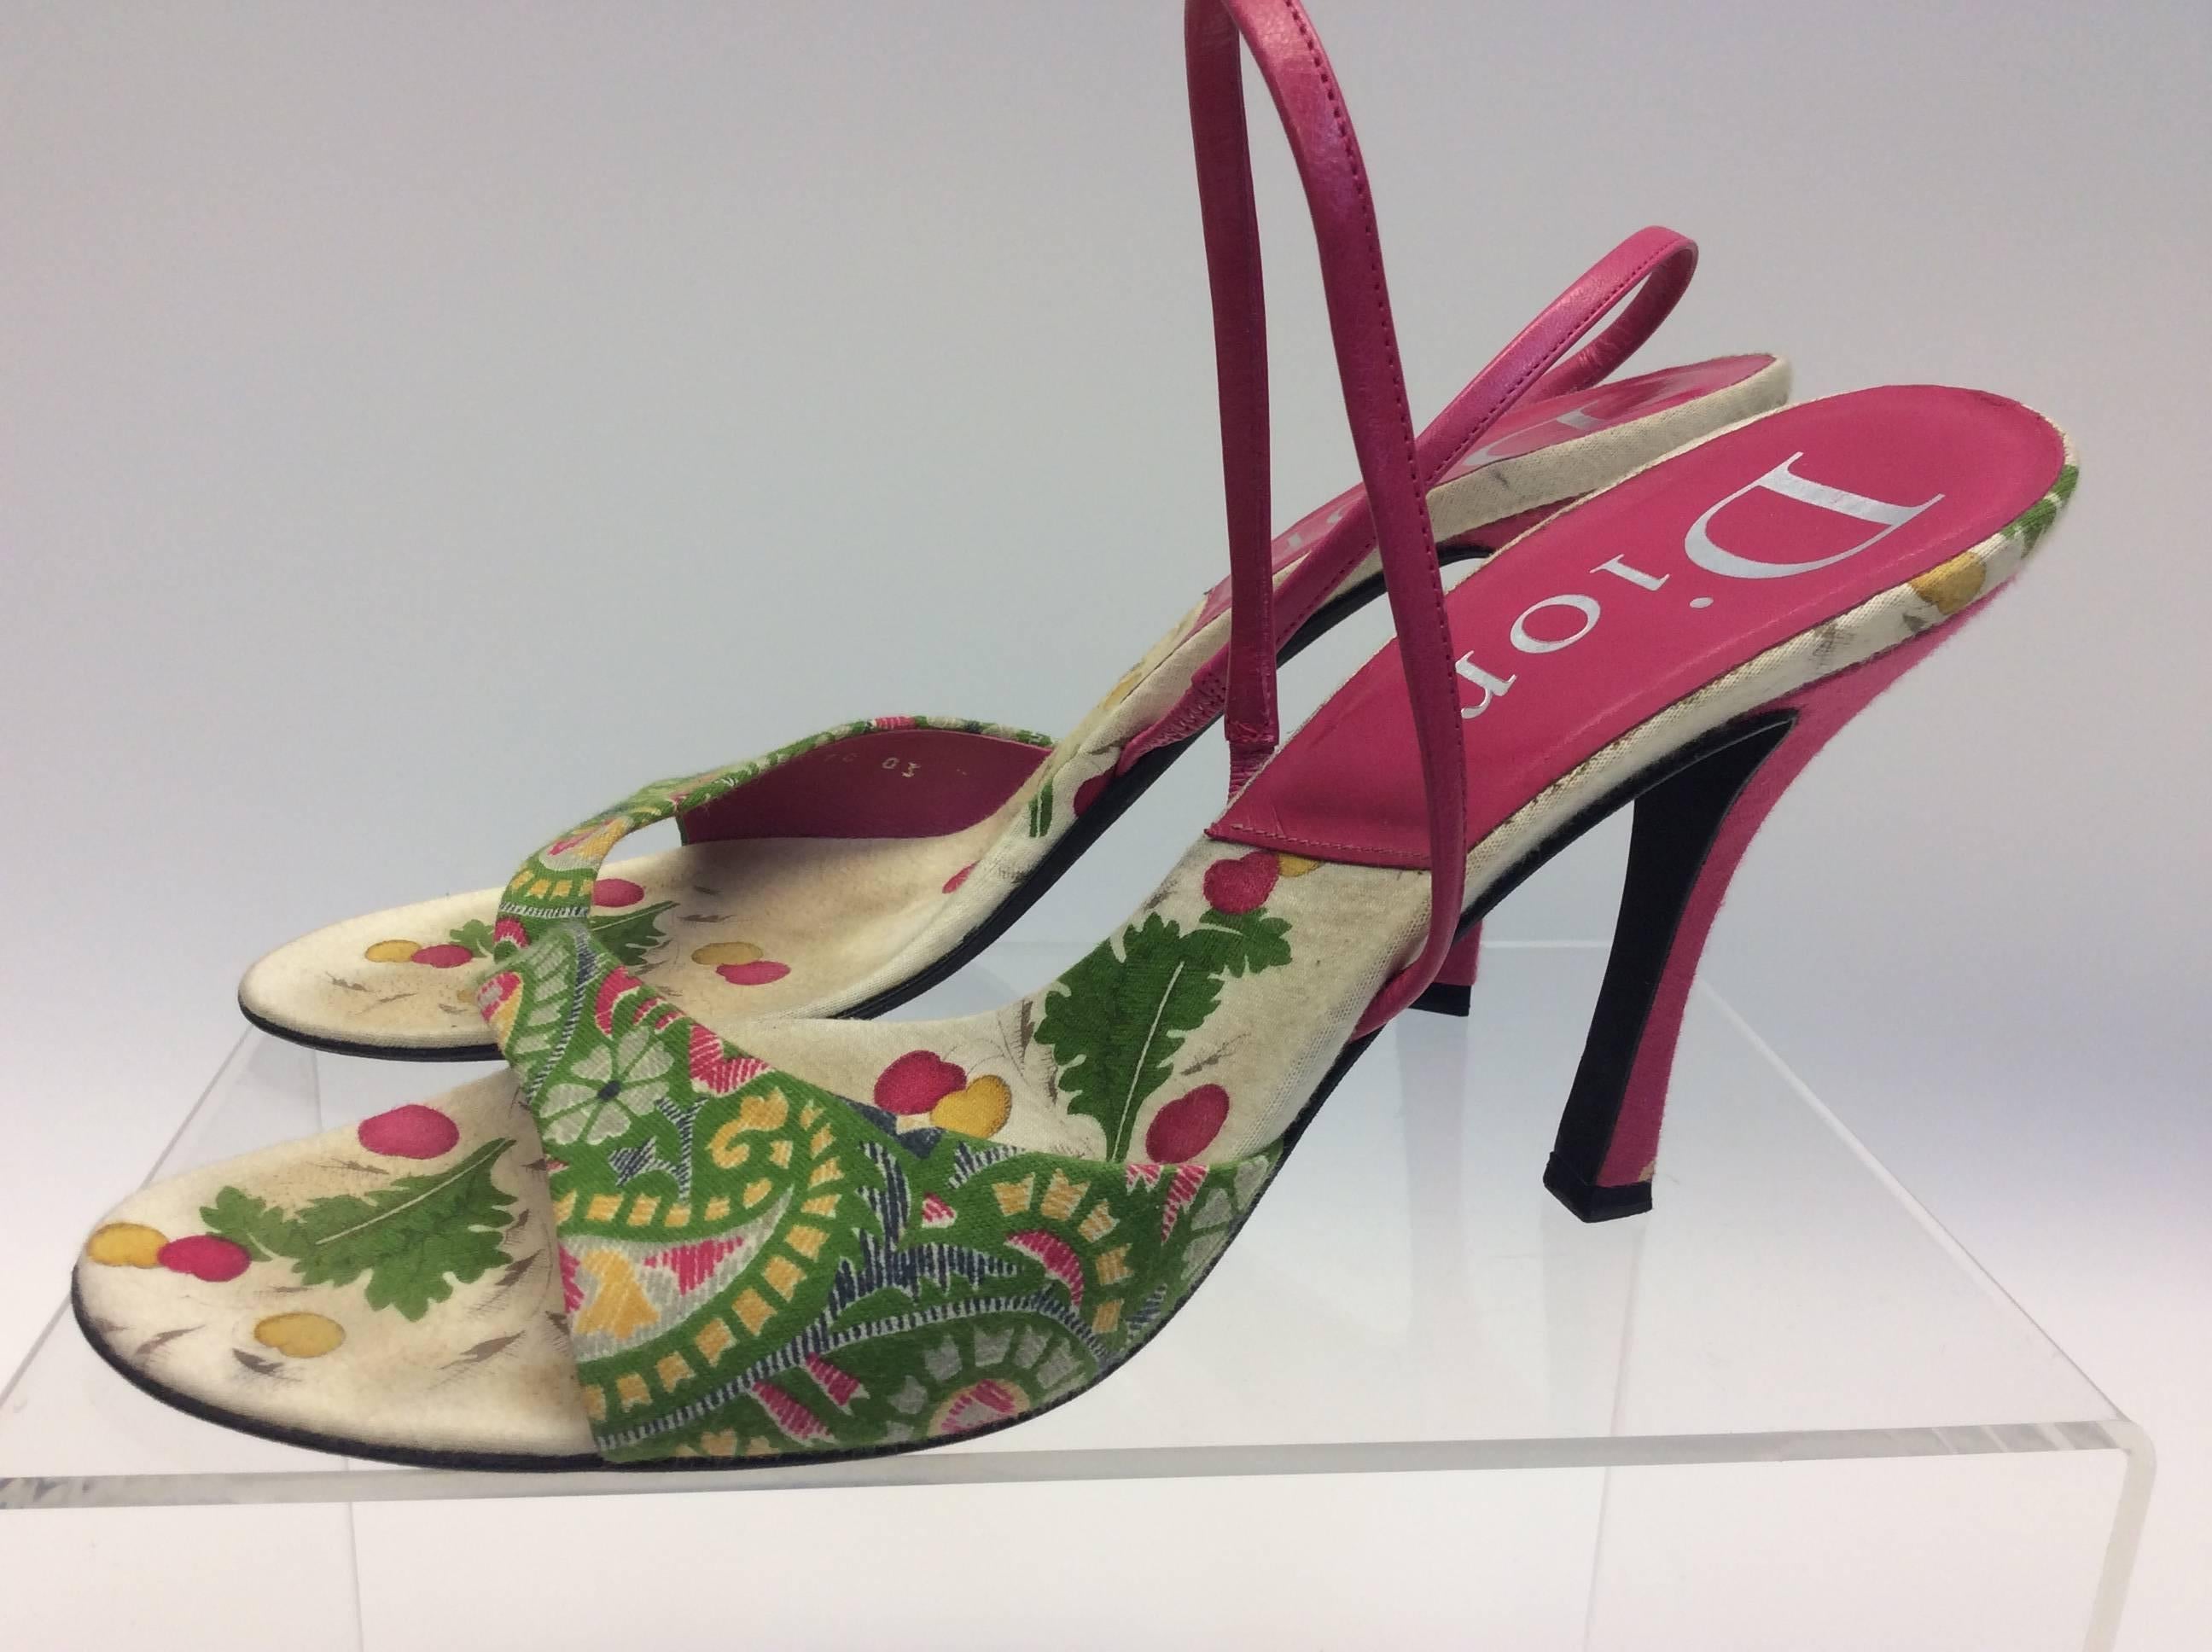 Christian Dior Floral Print Heels
$168
Made in Italy
Size 40.5
4